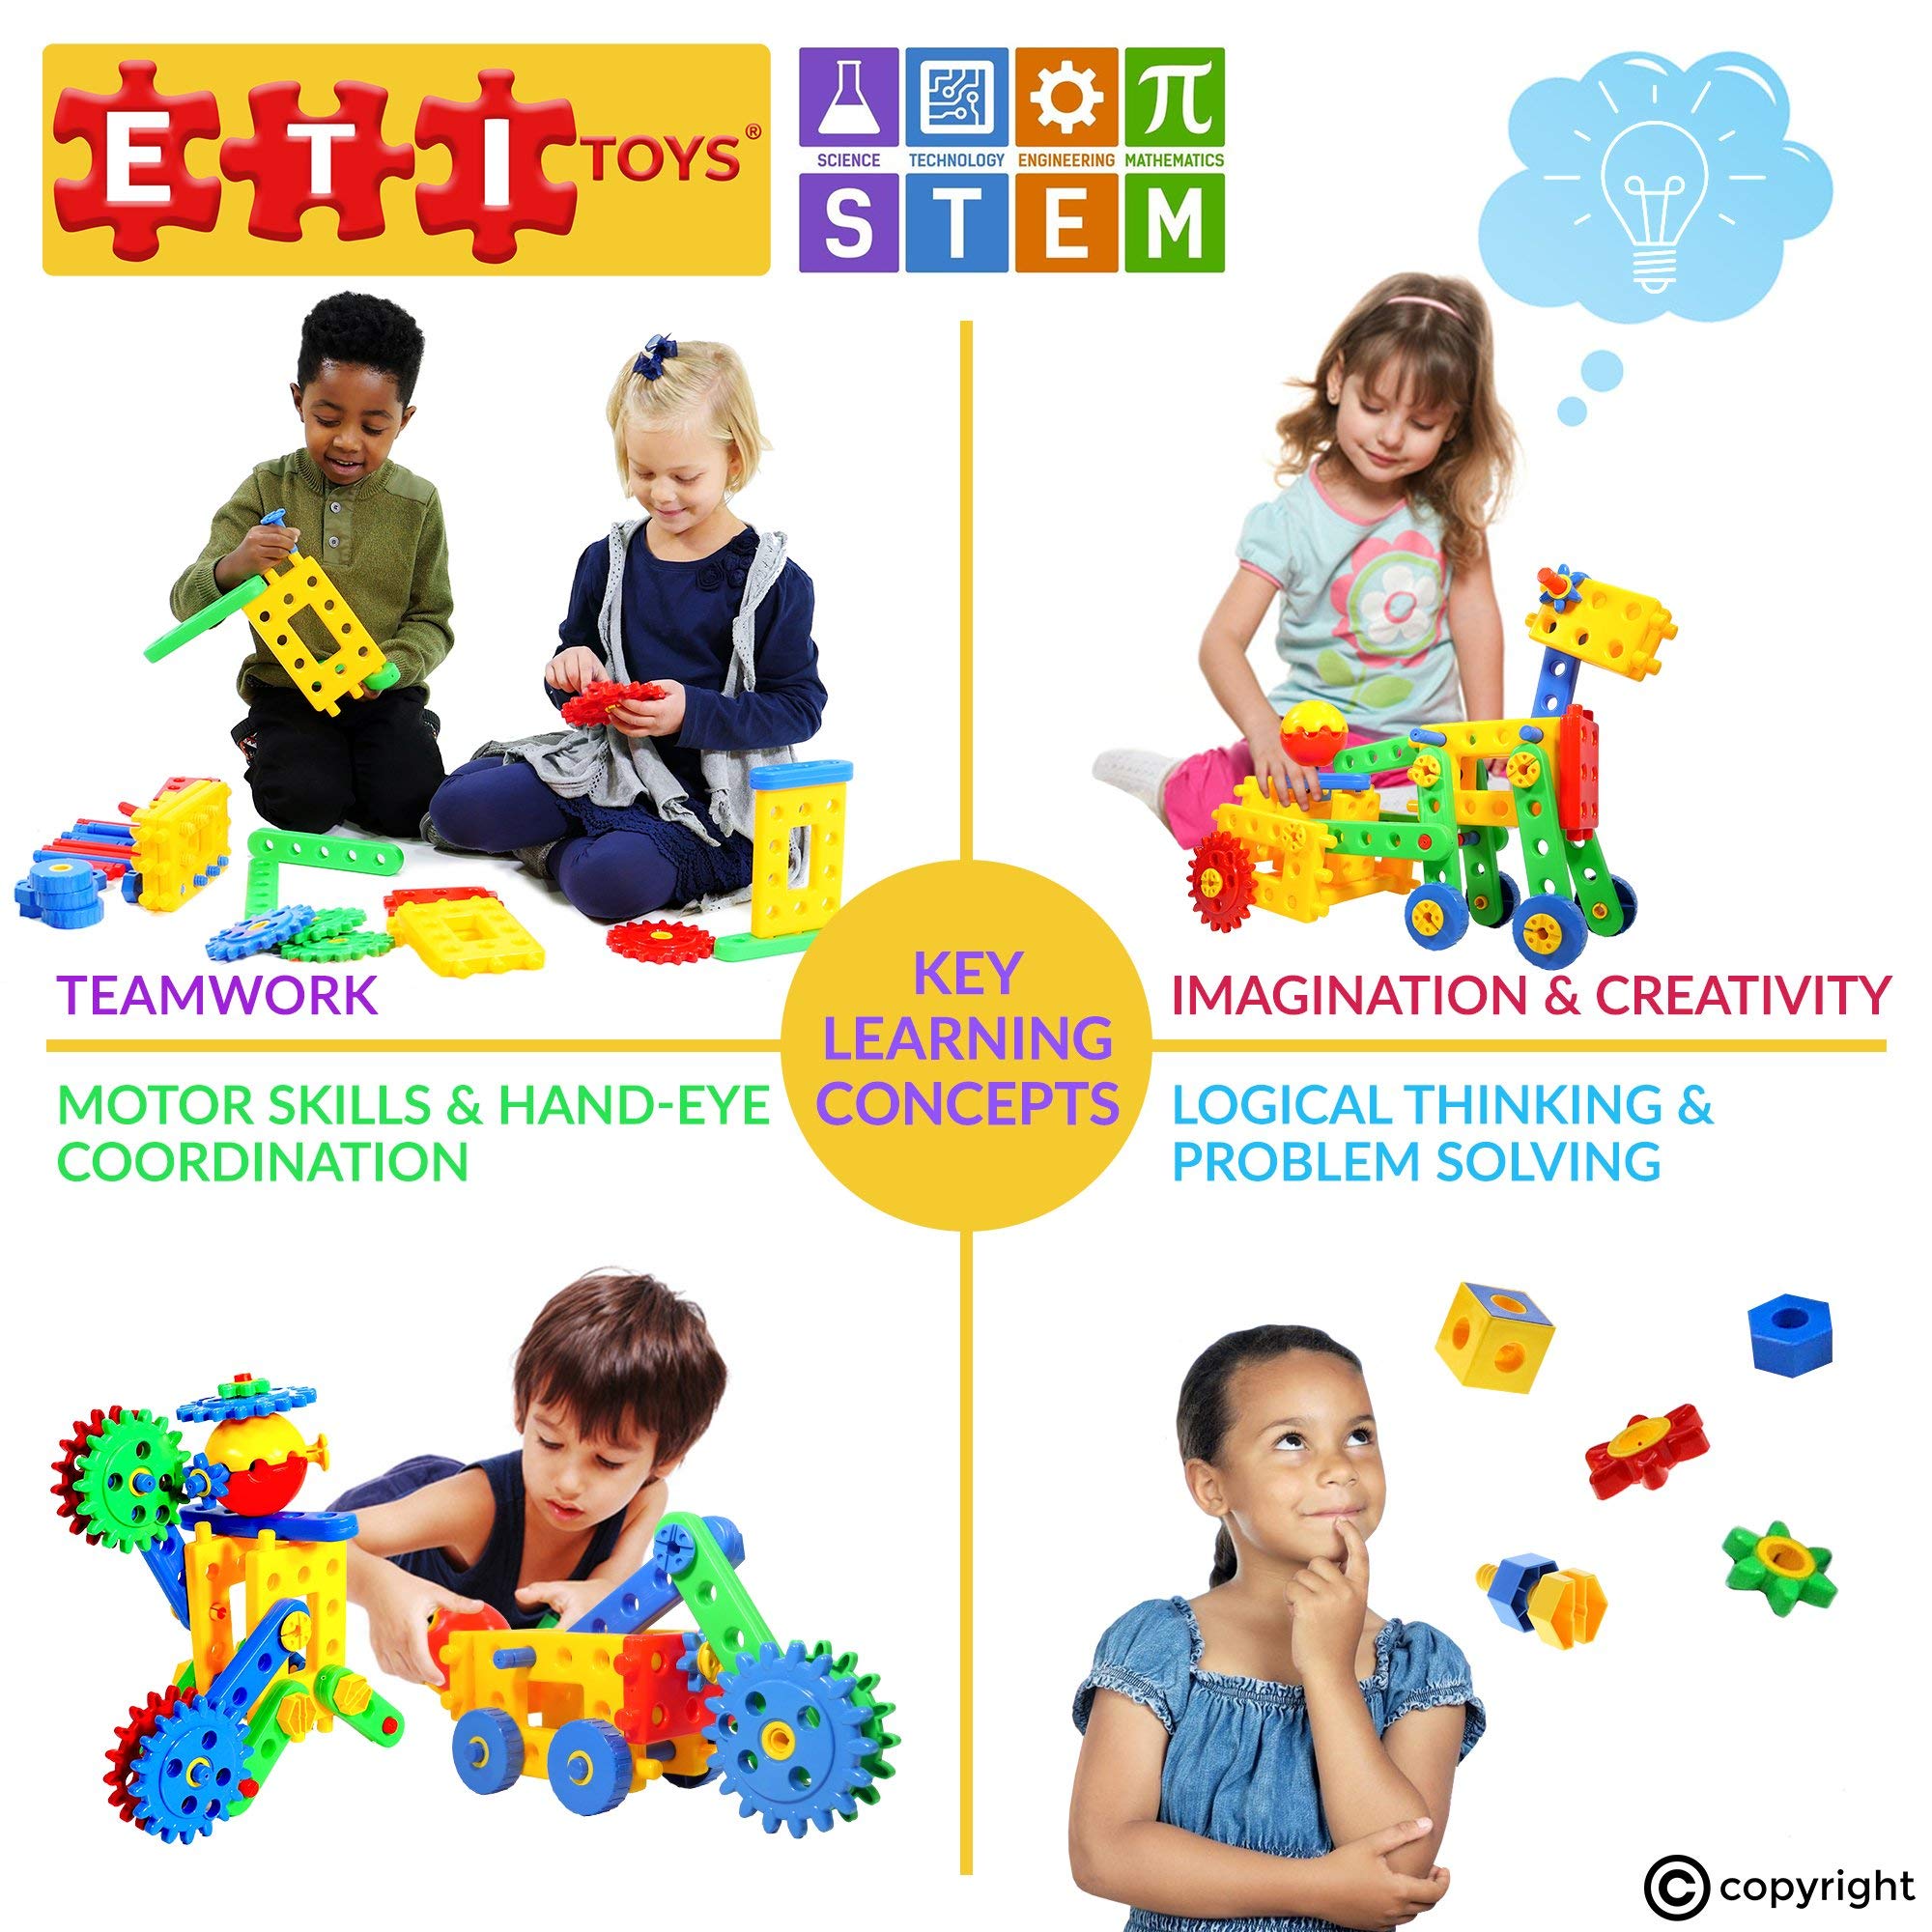 ETI Toys, STEM Learning, 109 Piece Educational Engineering Construction Blocks & Gears Building Set. Build Excavator, Horse & Buggy and More. Gift, Toy for 4, 5, 6, 7 Year Old Boys and Girls